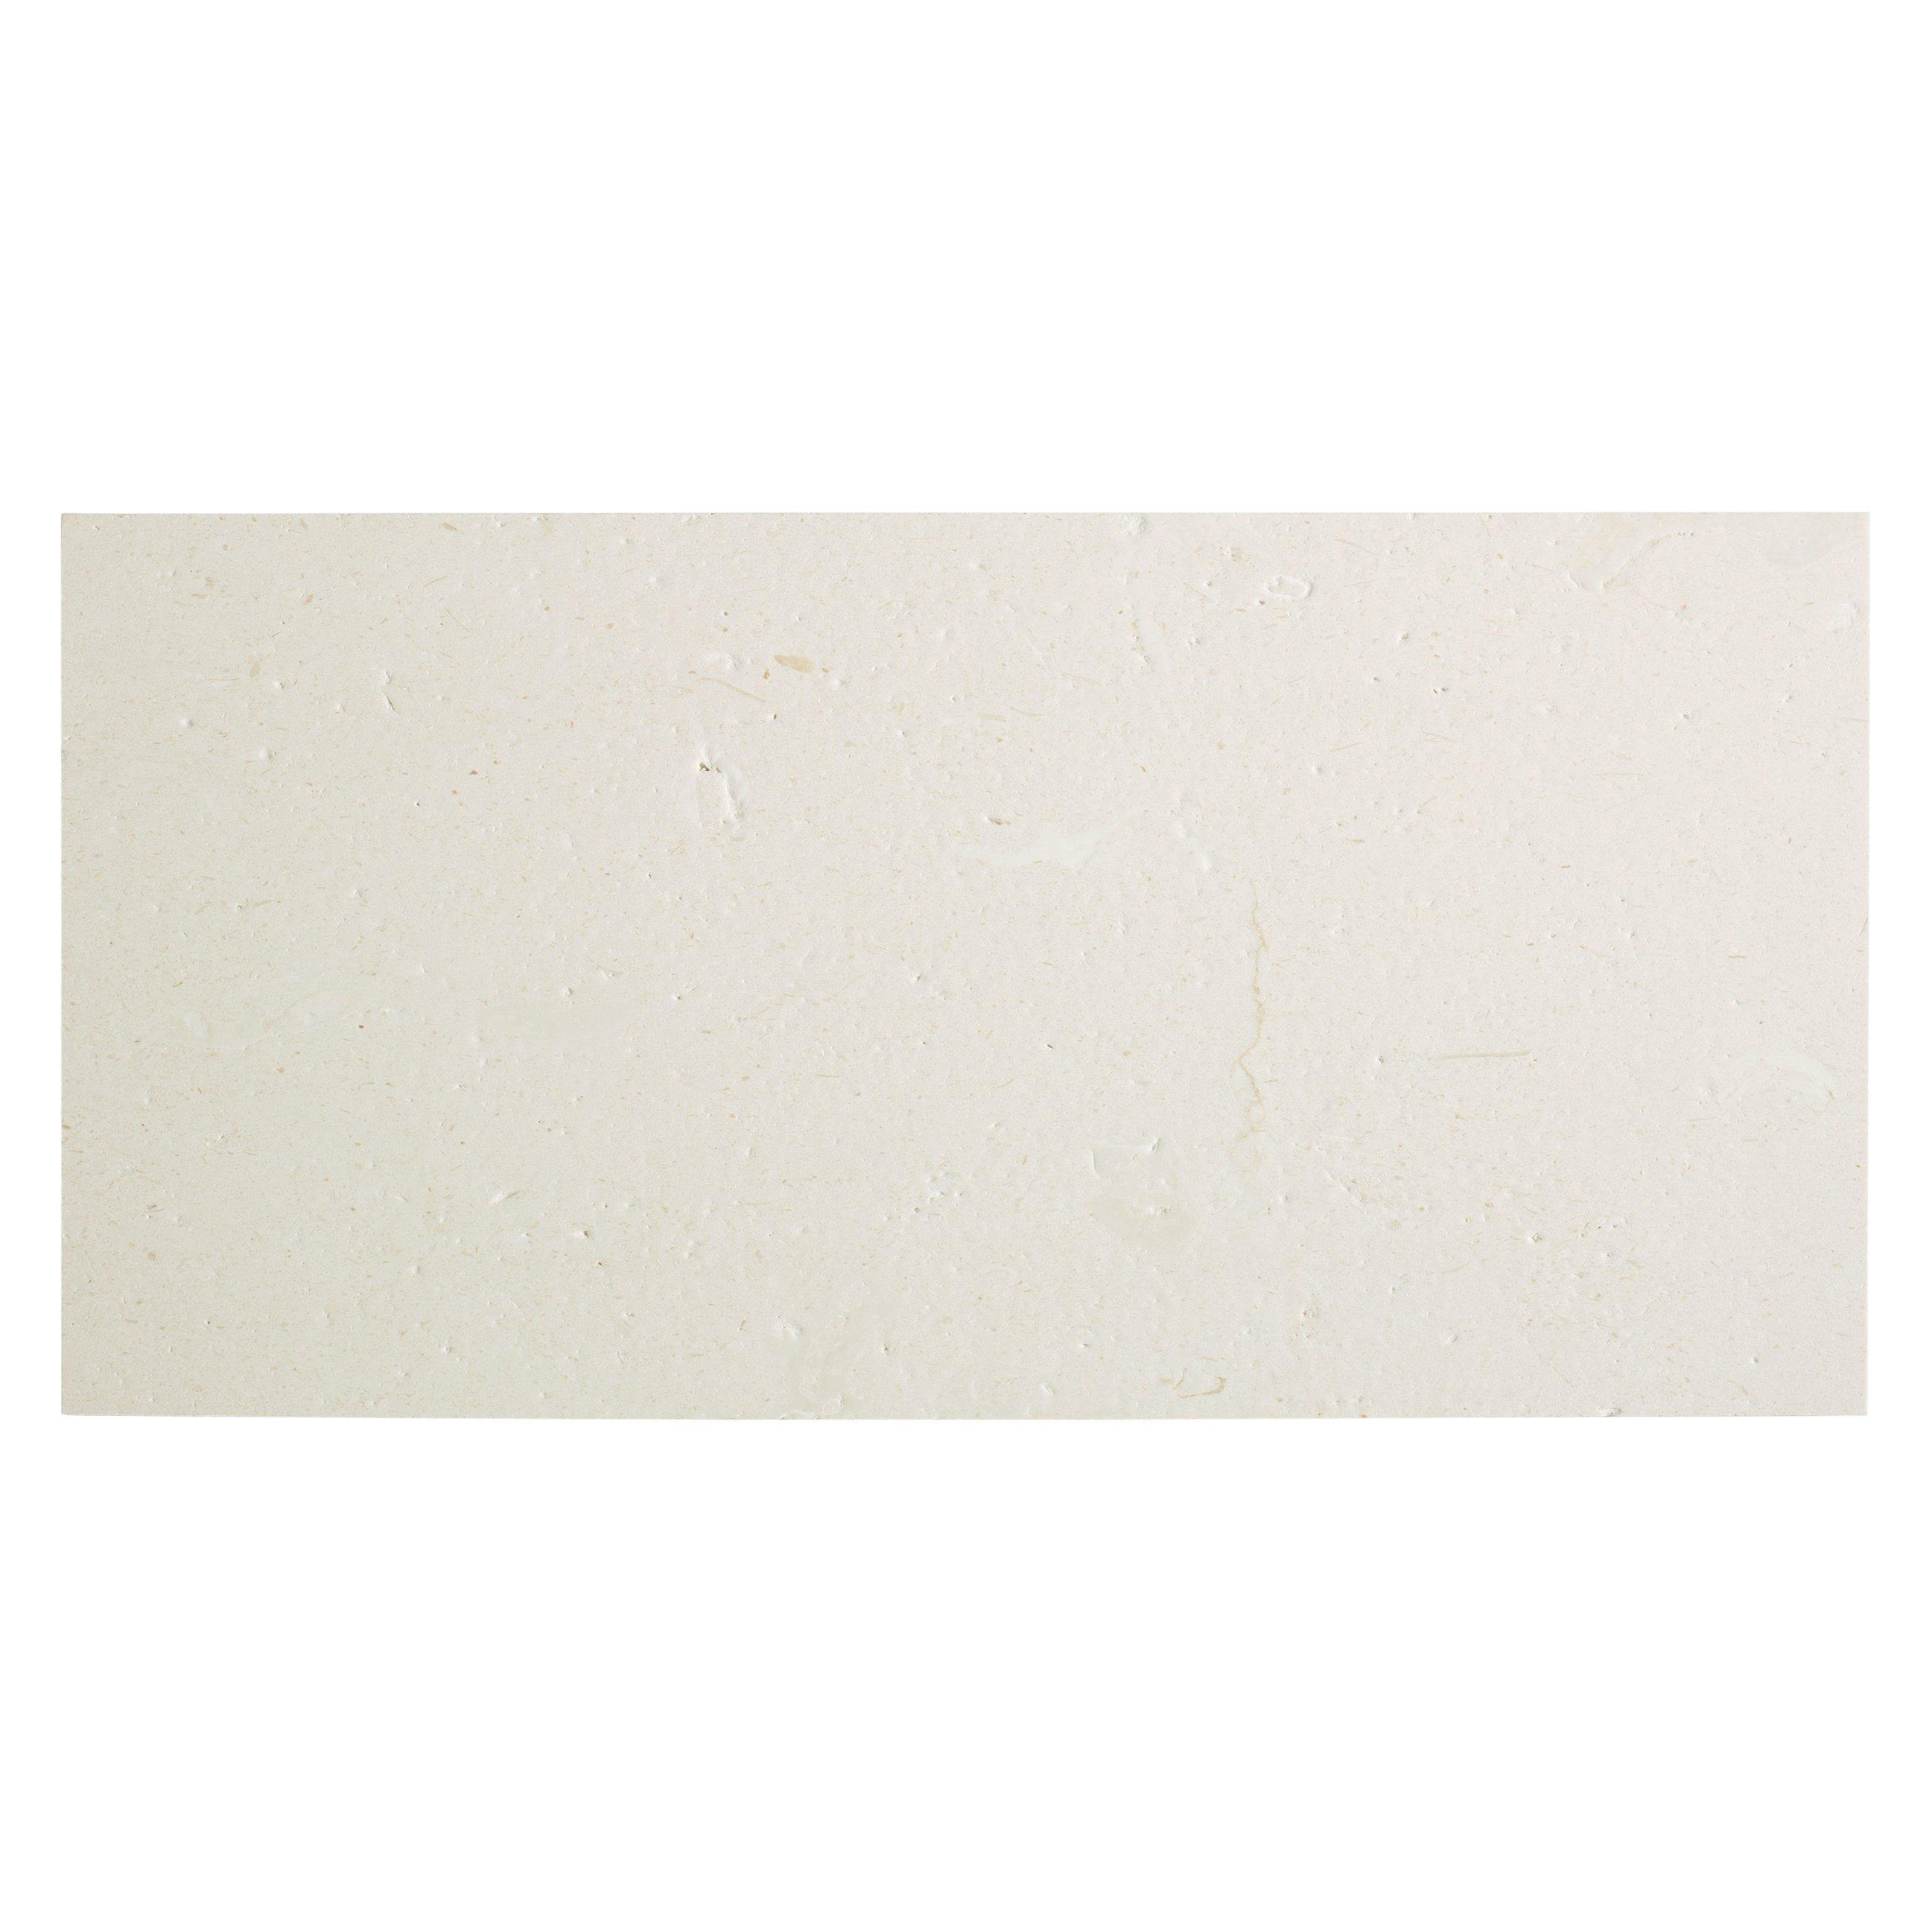 Fossil Beige Brushed Limestone - 12 x 24 - 100698984 | Floor and Decor